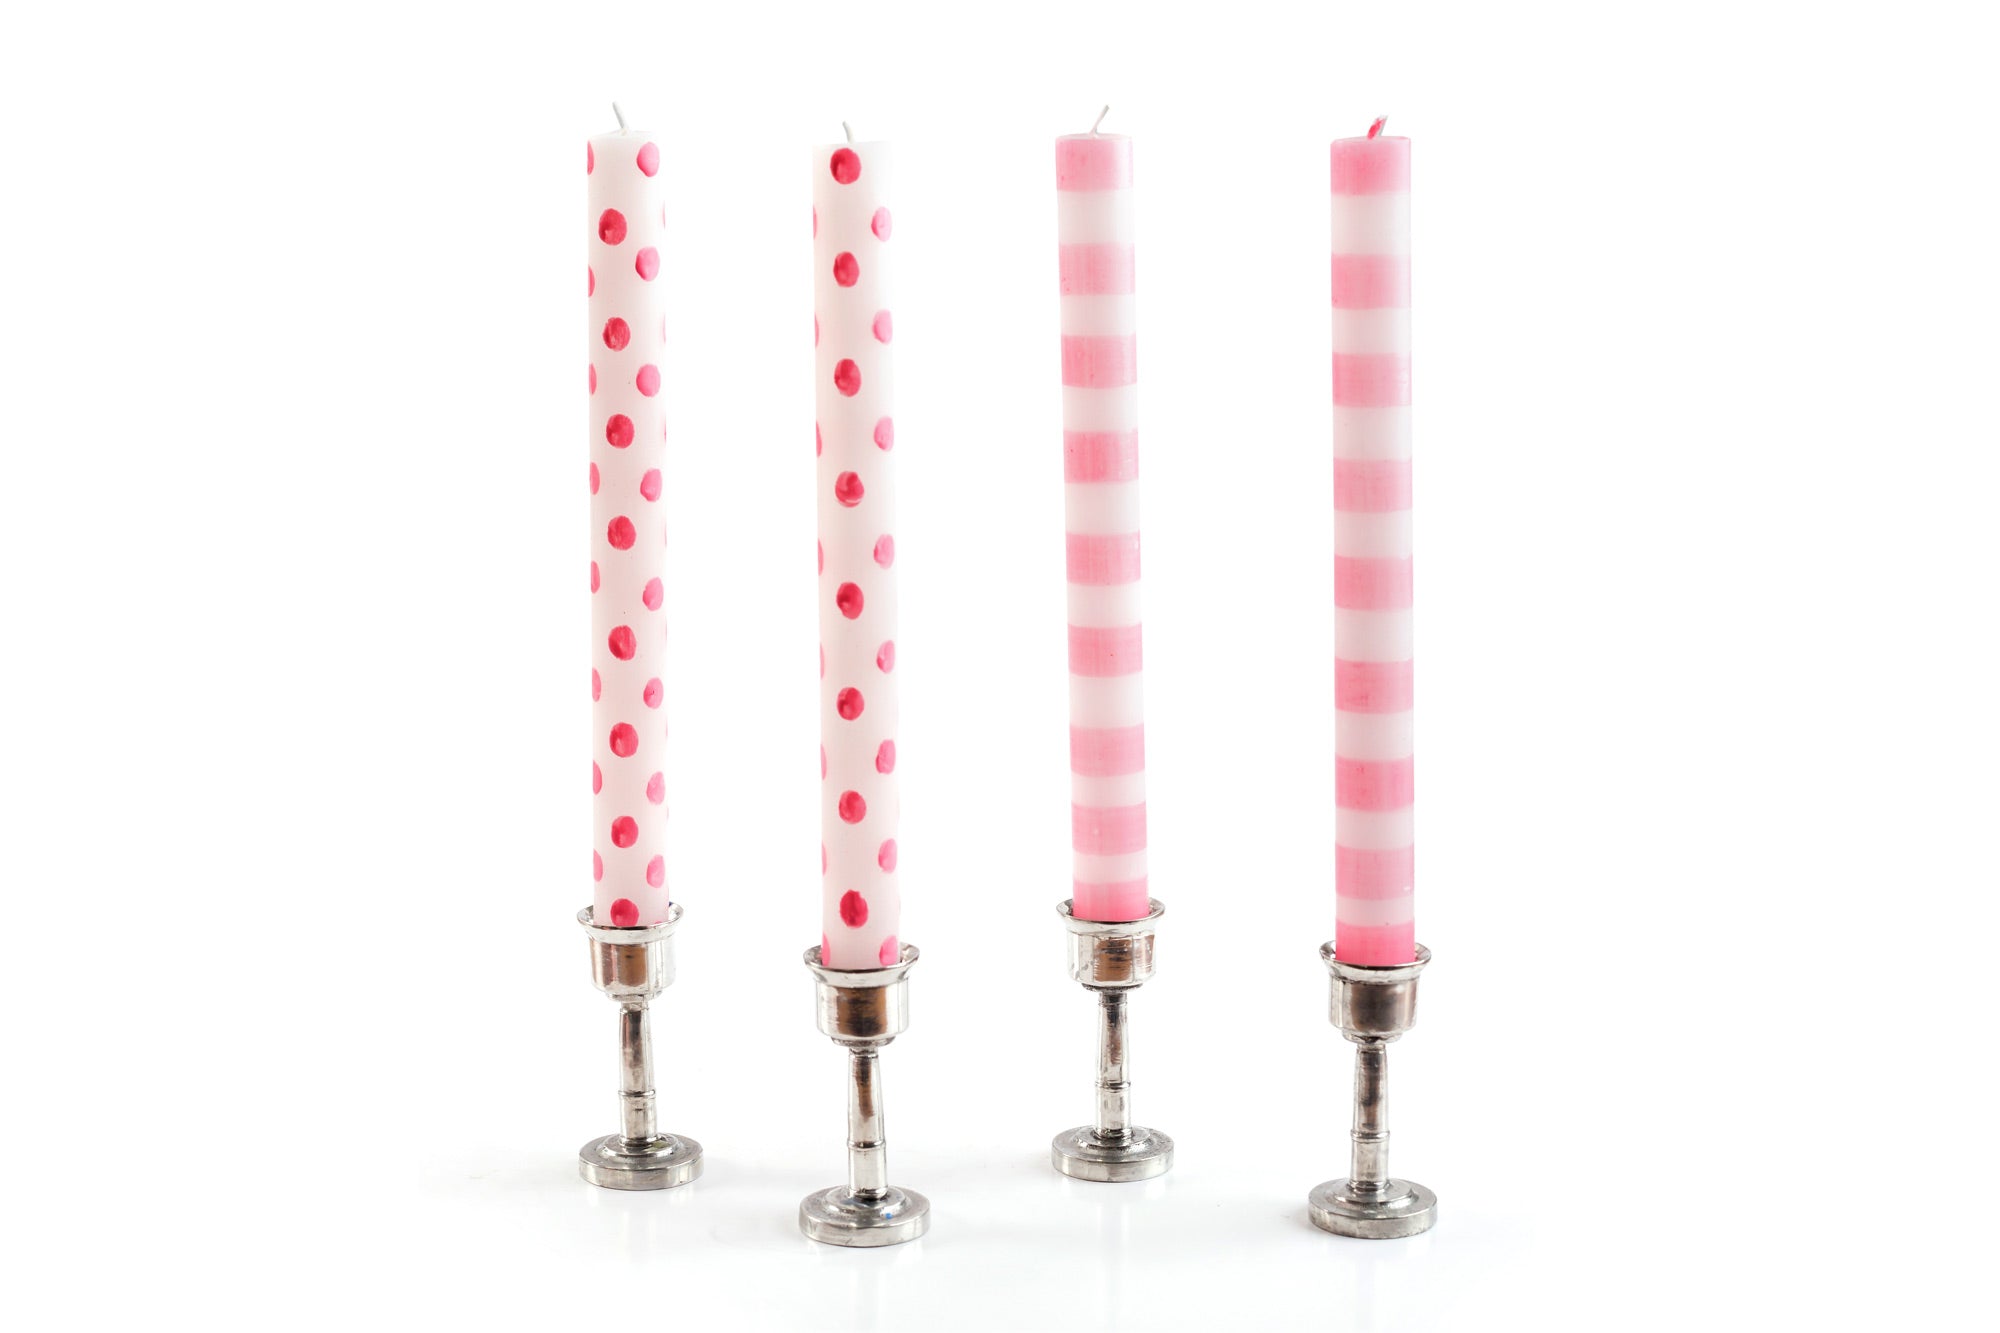 4 taper candles in pewter candle holders, two are white candles with pink dots, and two are white candles with blue dots.